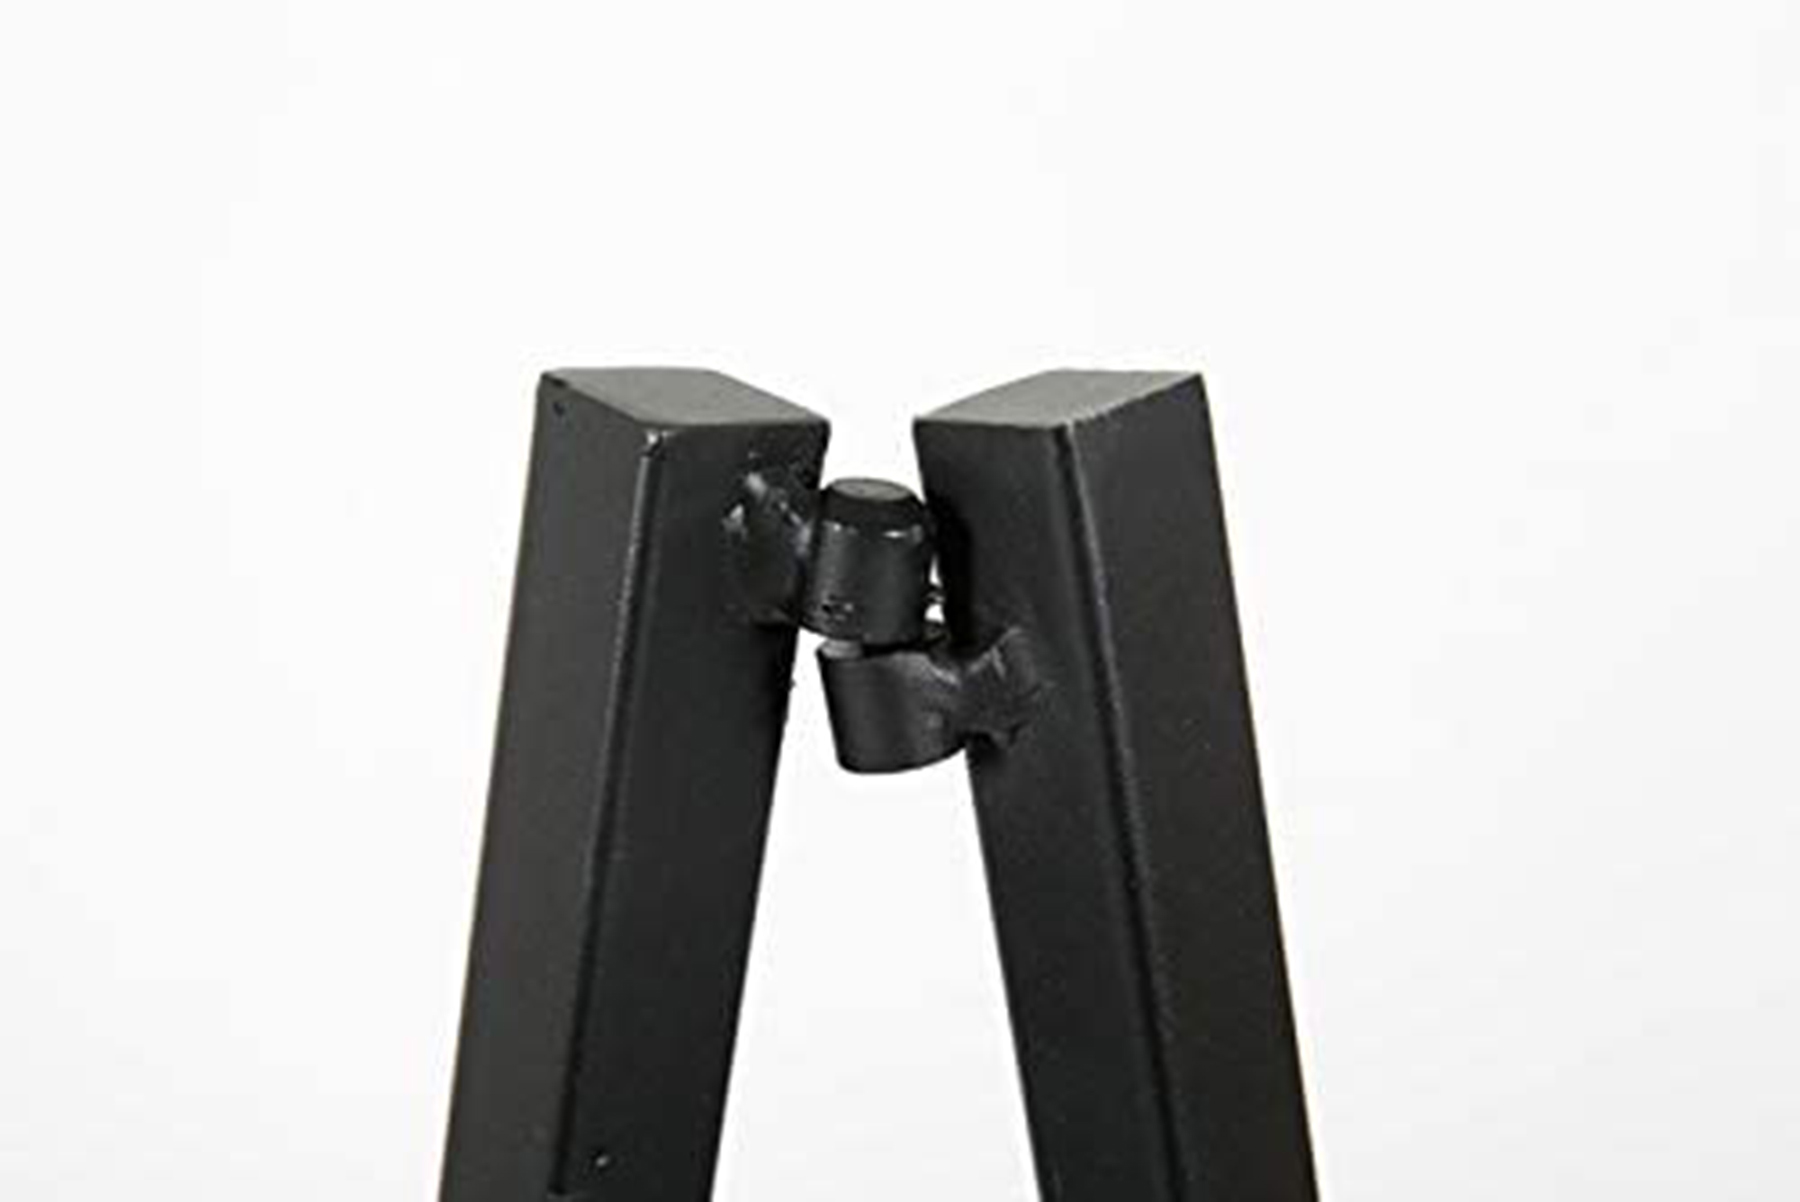 Black Collapsible Metal Easel for Presentations